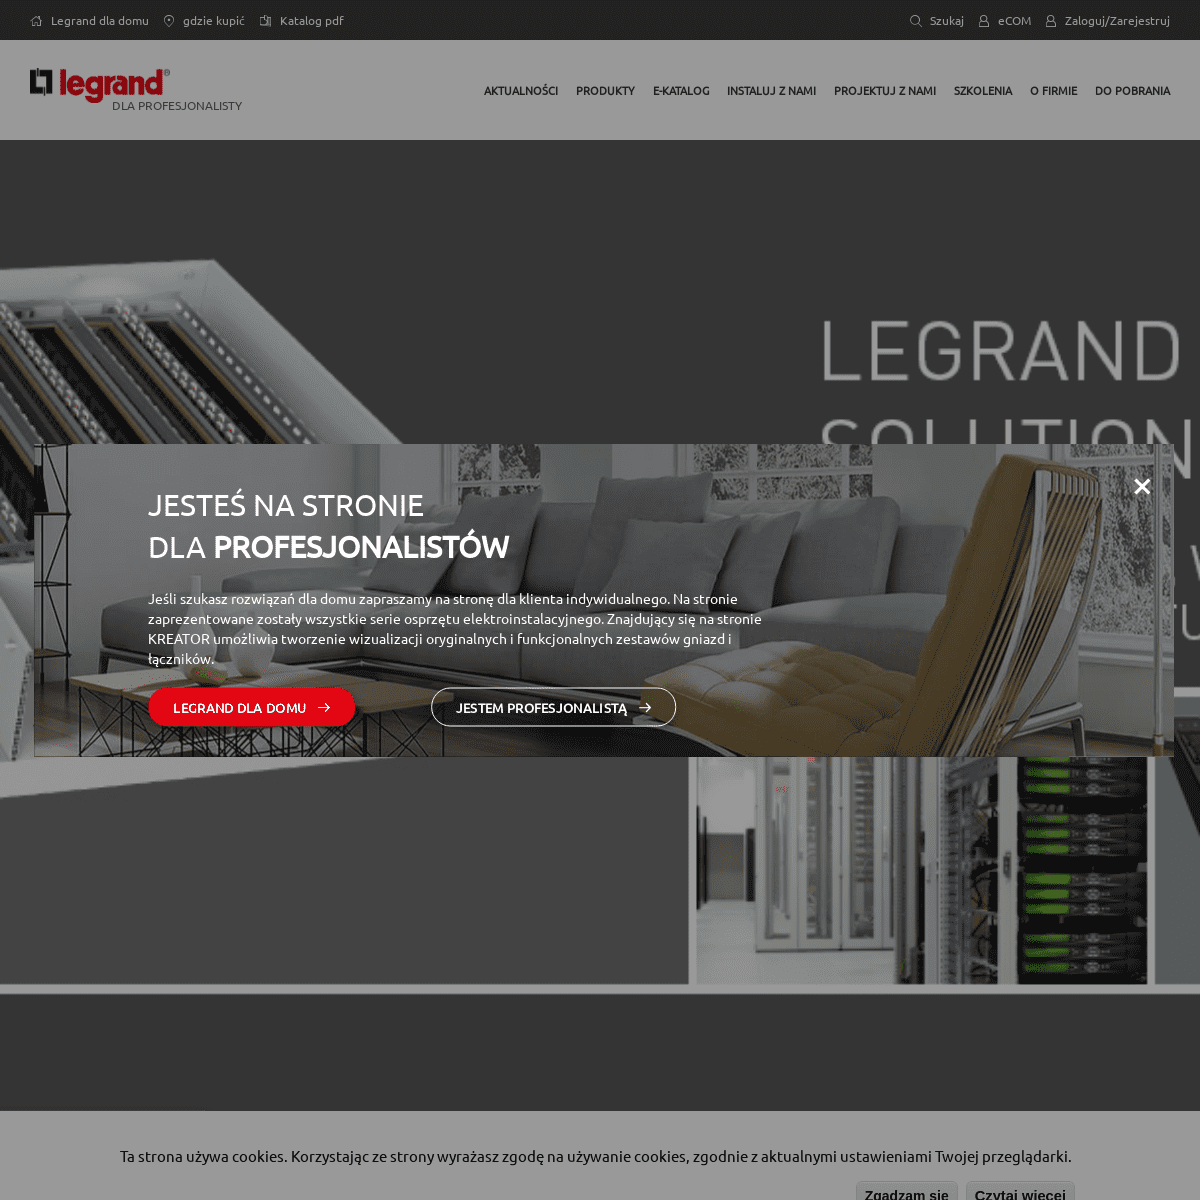 A complete backup of https://legrand.pl